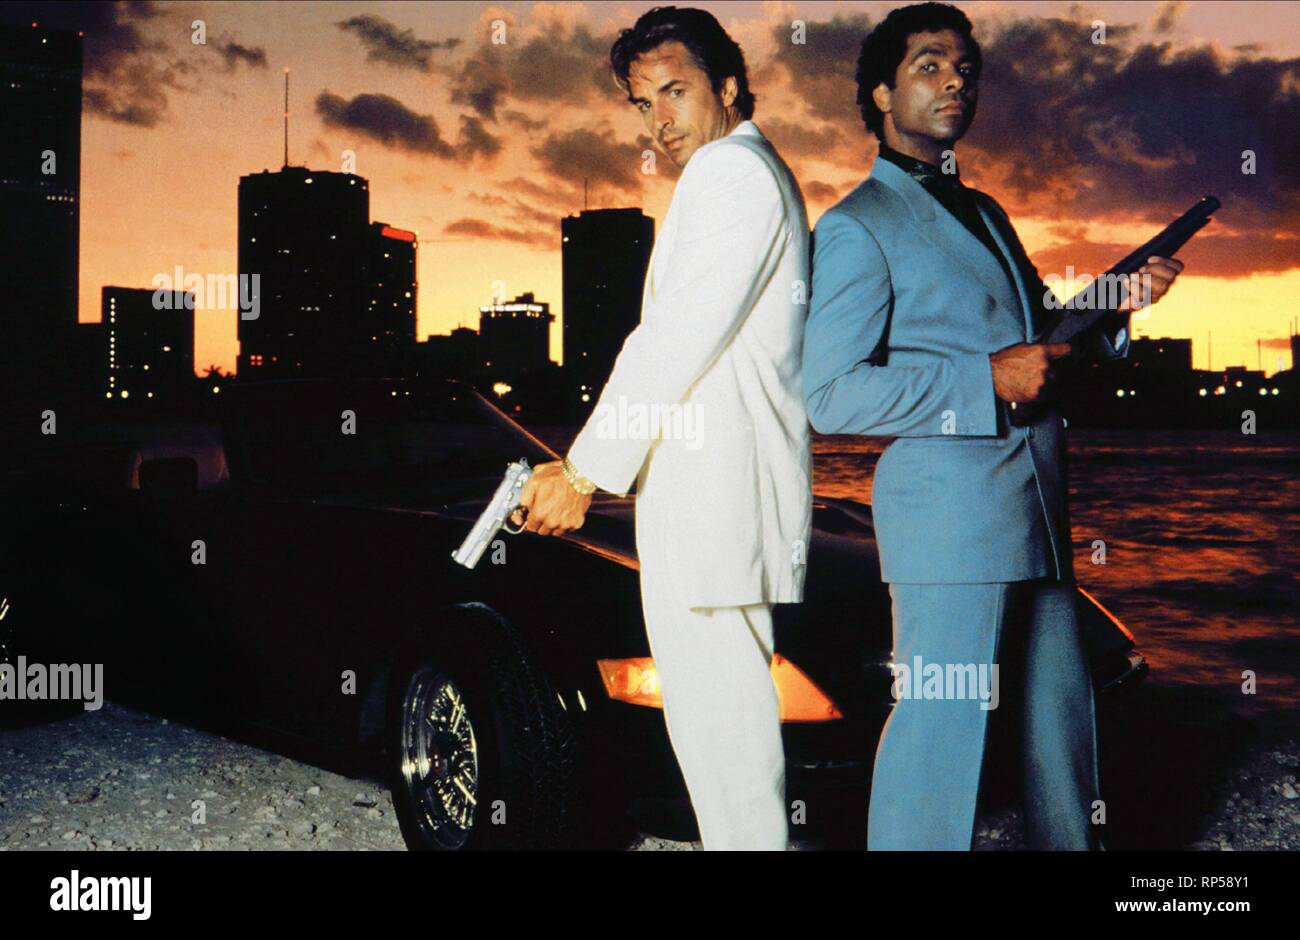 Miami Vice High Resolution Stock Photography and Images - Alamy